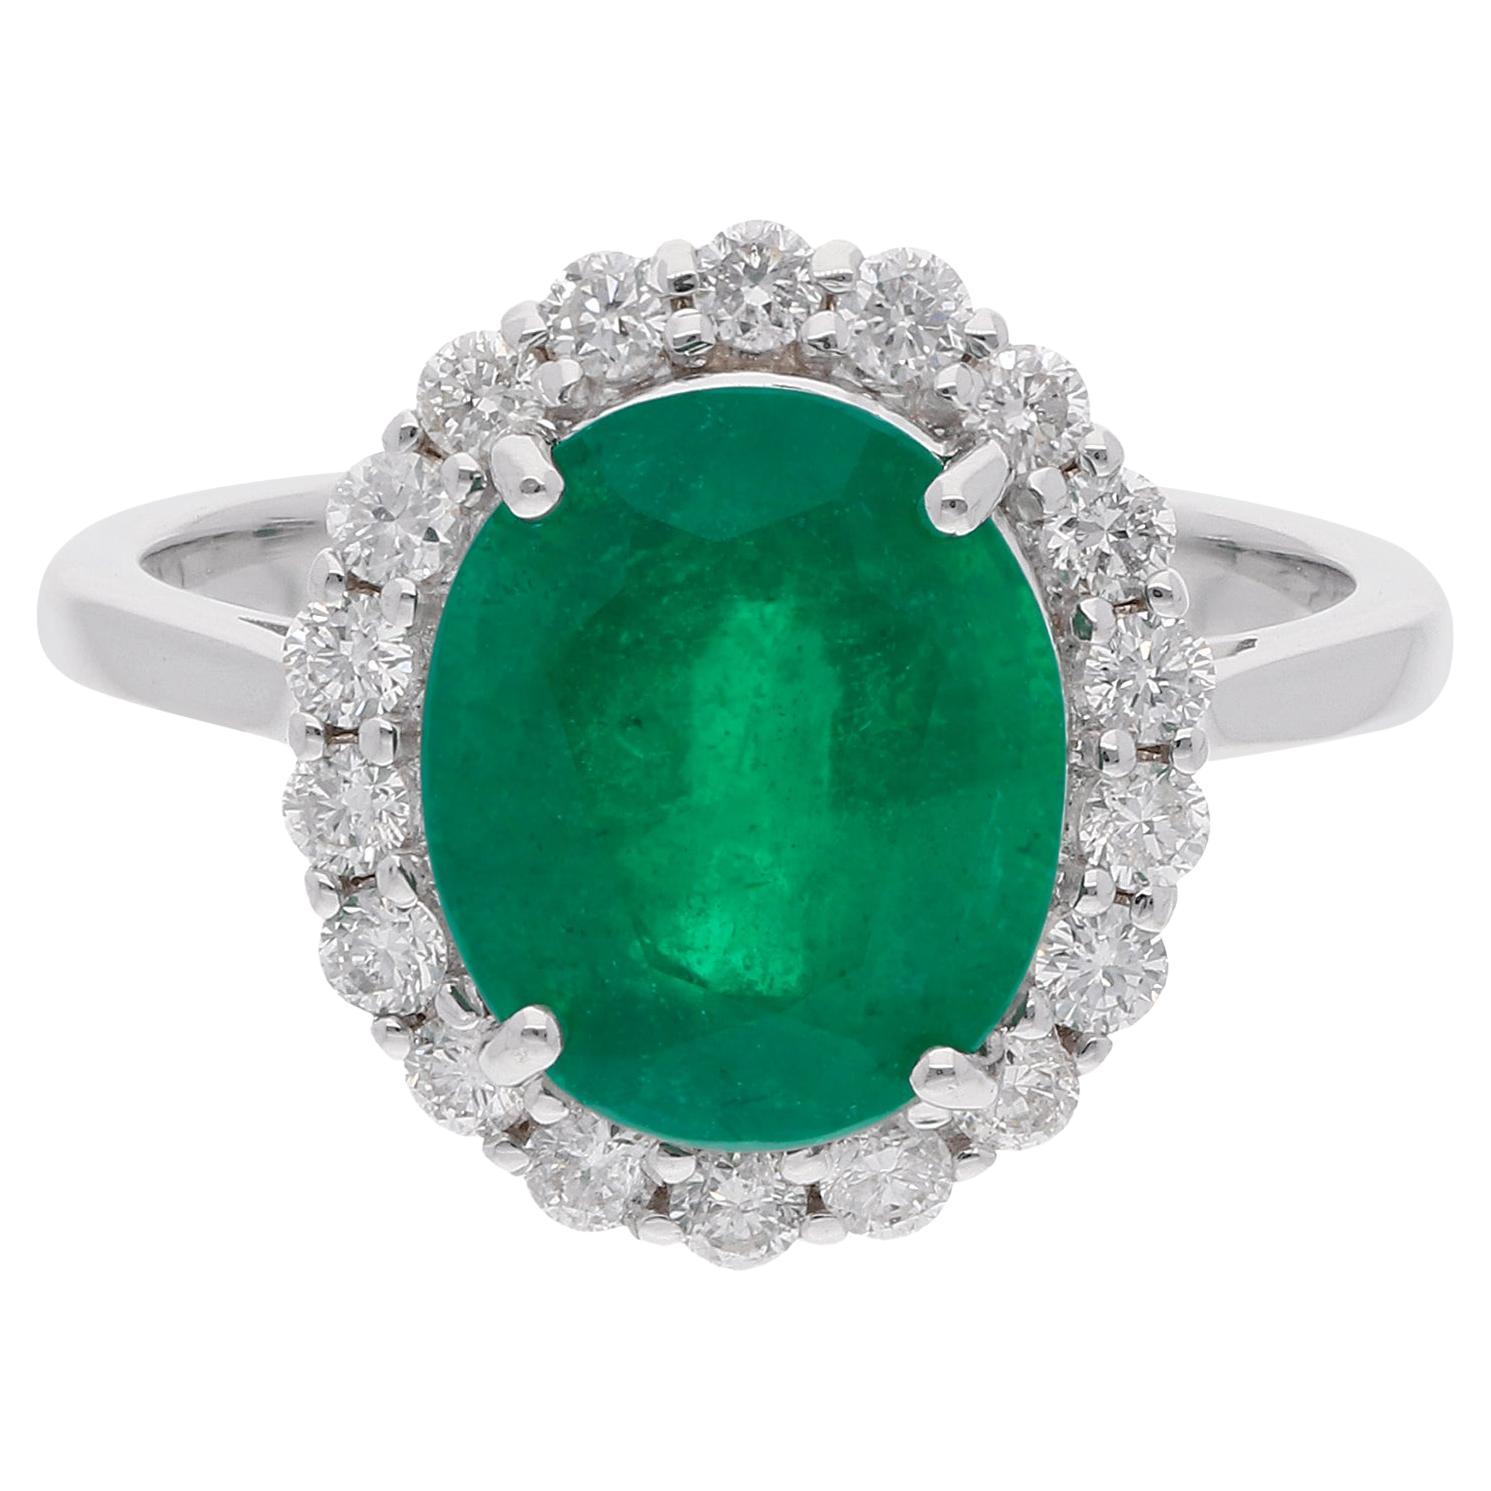 Oval Natural Emerald Gemstone Cocktail Ring Diamond 14 Karat White Gold Jewelry For Sale